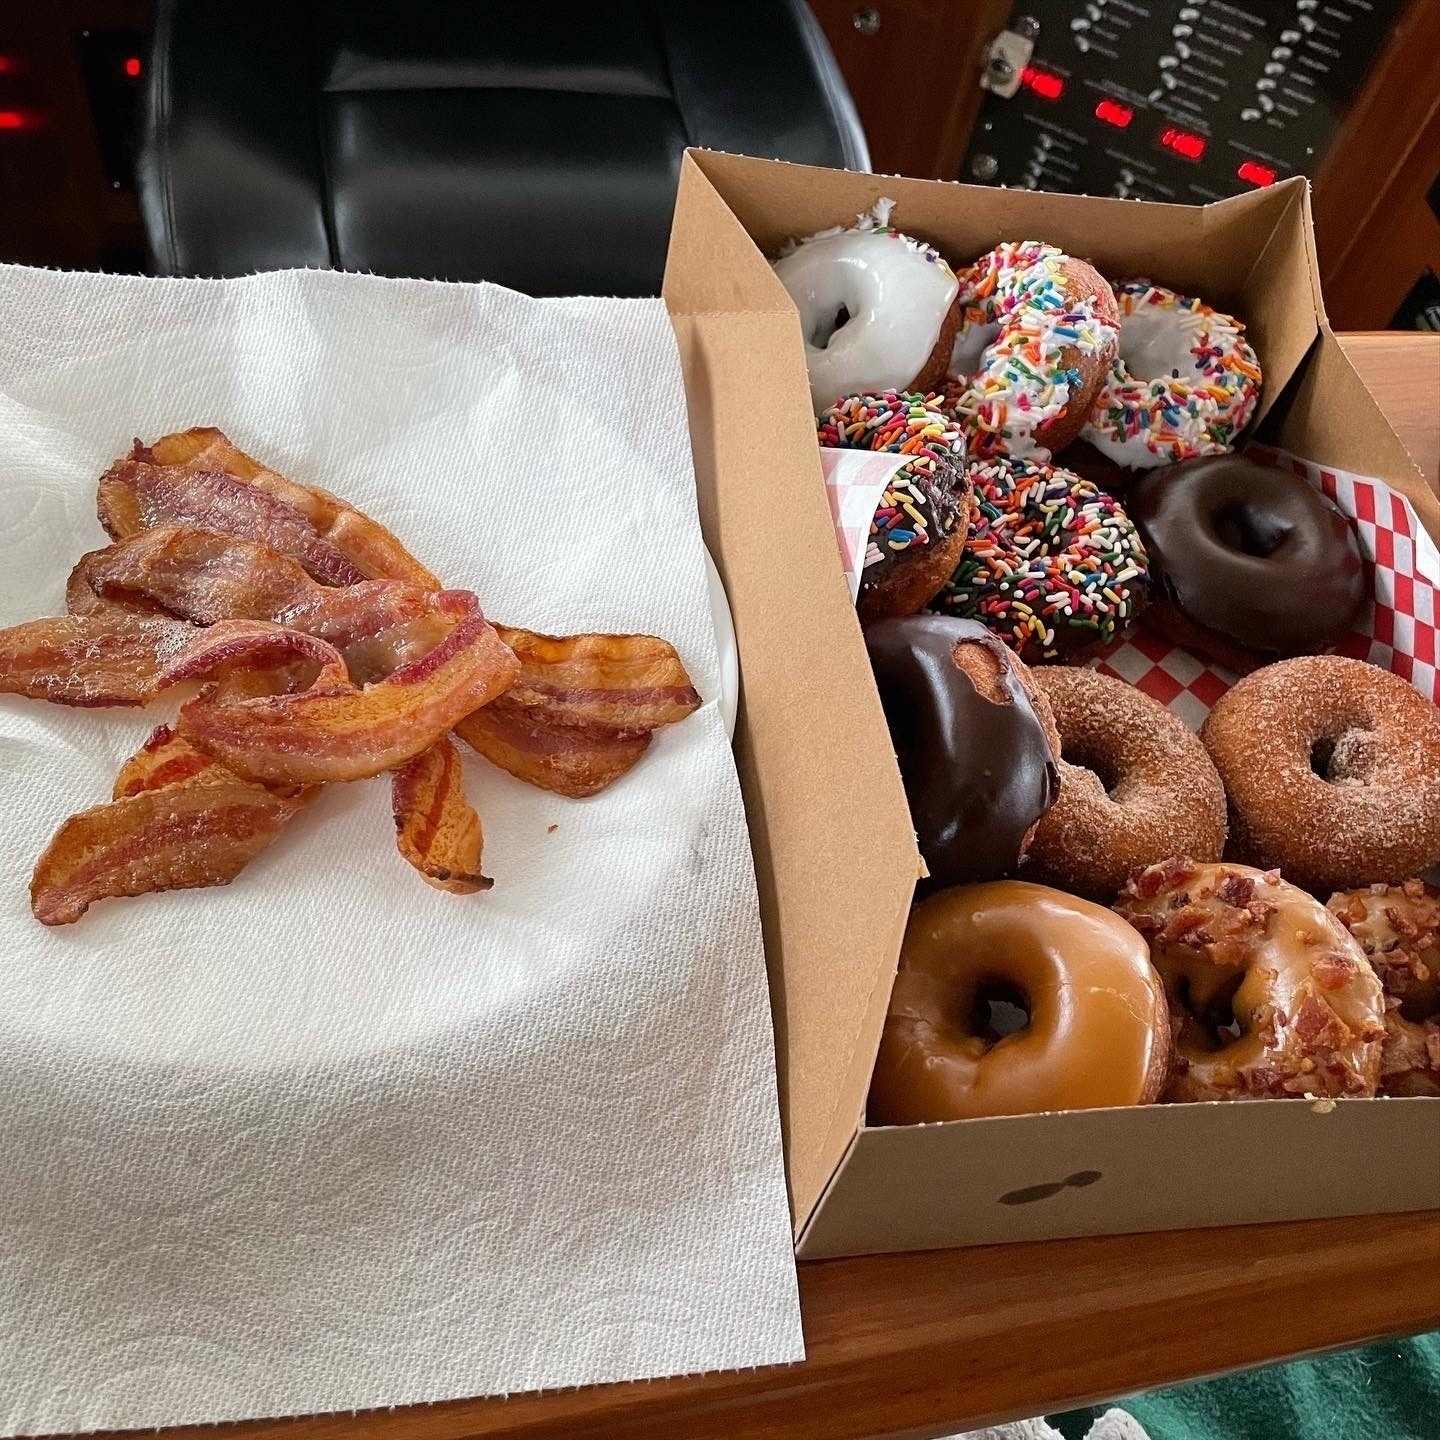 Bacon and donuts